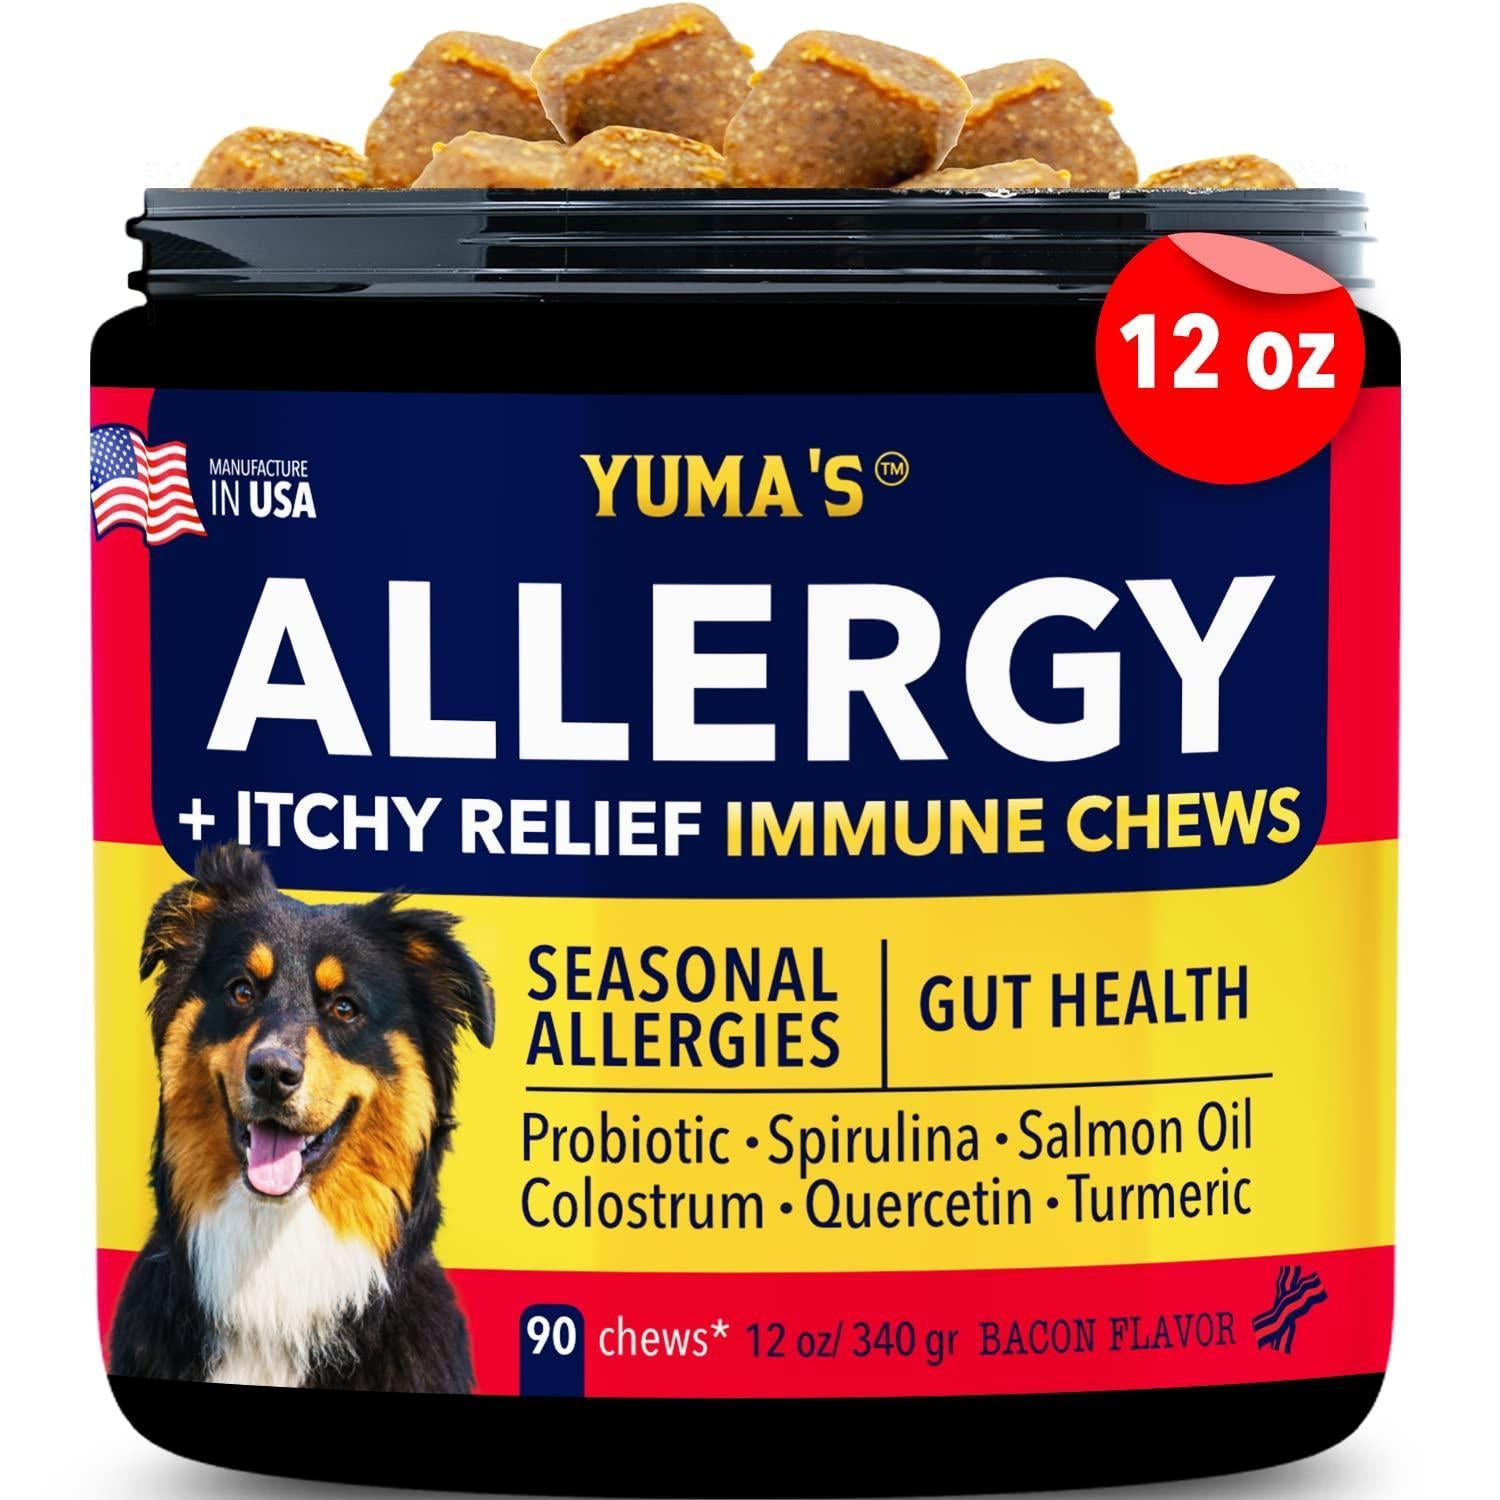 YUMA'S Dog Allergy Chews   Itch Relief for Dogs   Dog Allergy Relief   Anti Itch for Dogs   Dog Itchy Skin   Dog Allergy Support   Hot Spots   Immune Health Supplement   Made in USA   90 Chews